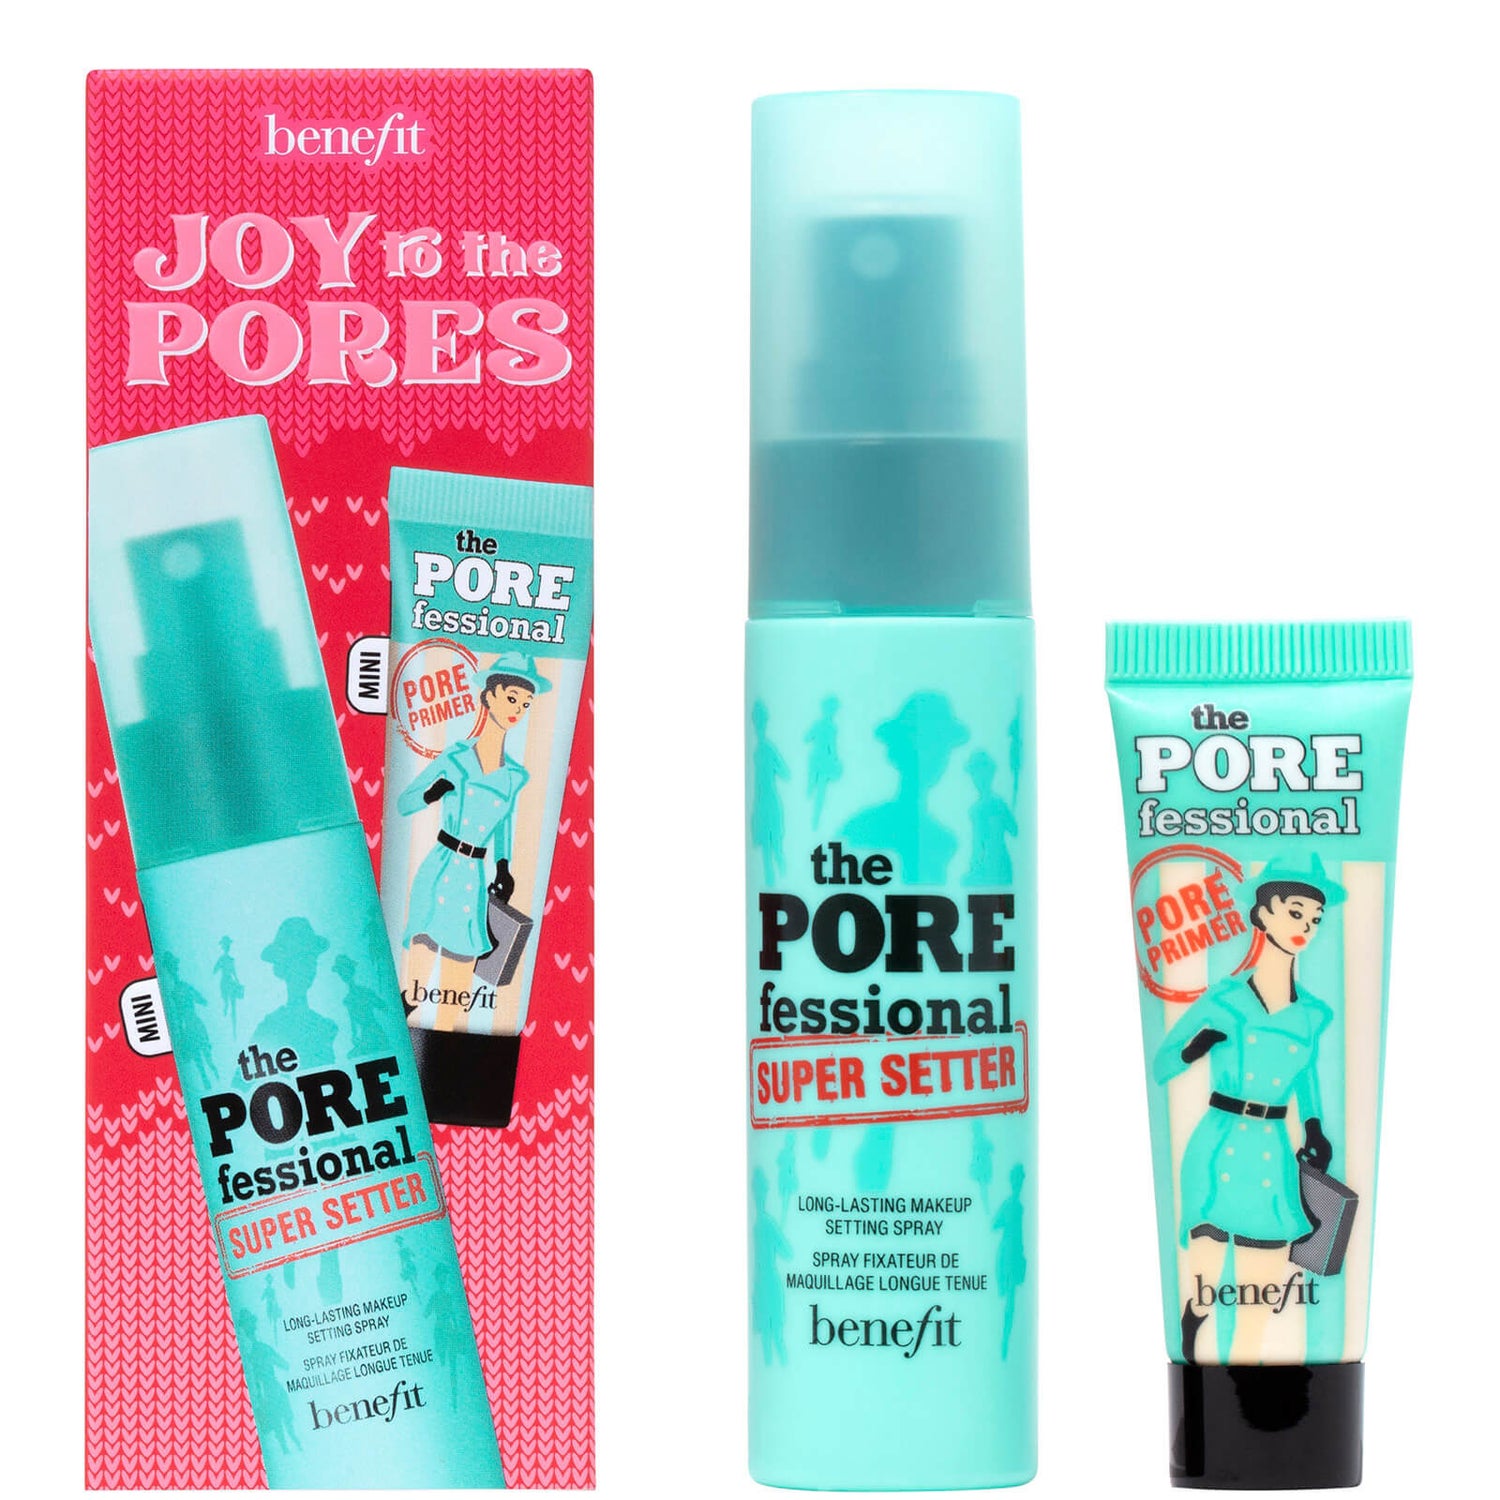 benefit Joy to The Pores Duo Gift Set (Worth £25.00)